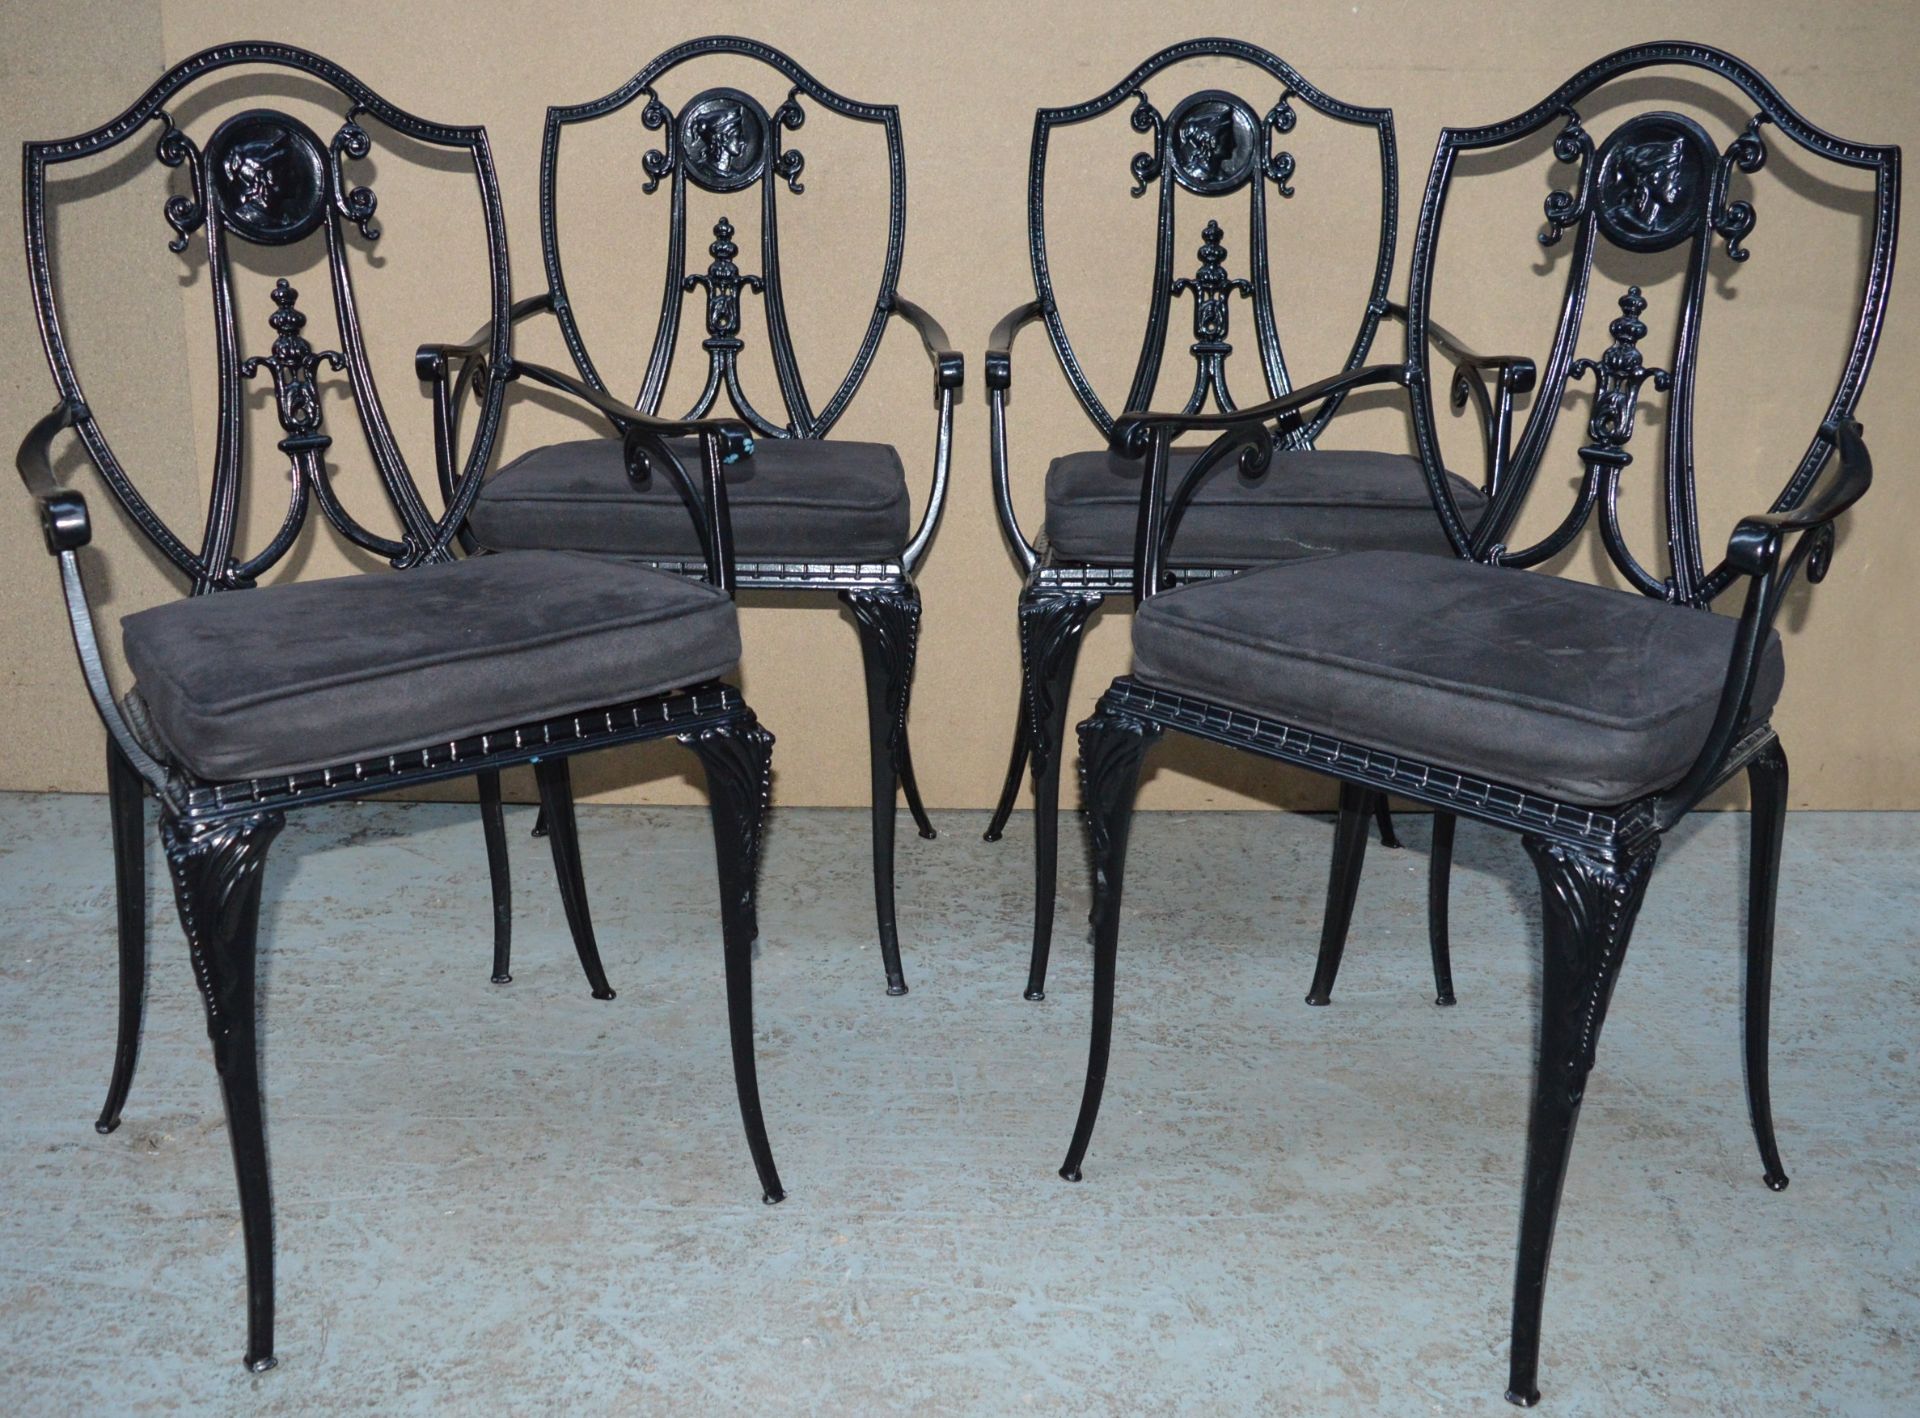 4 x Cast Metal Shield Back Restaurant Chairs - Suitable For Indoor or Outdoor Use - From Famouse